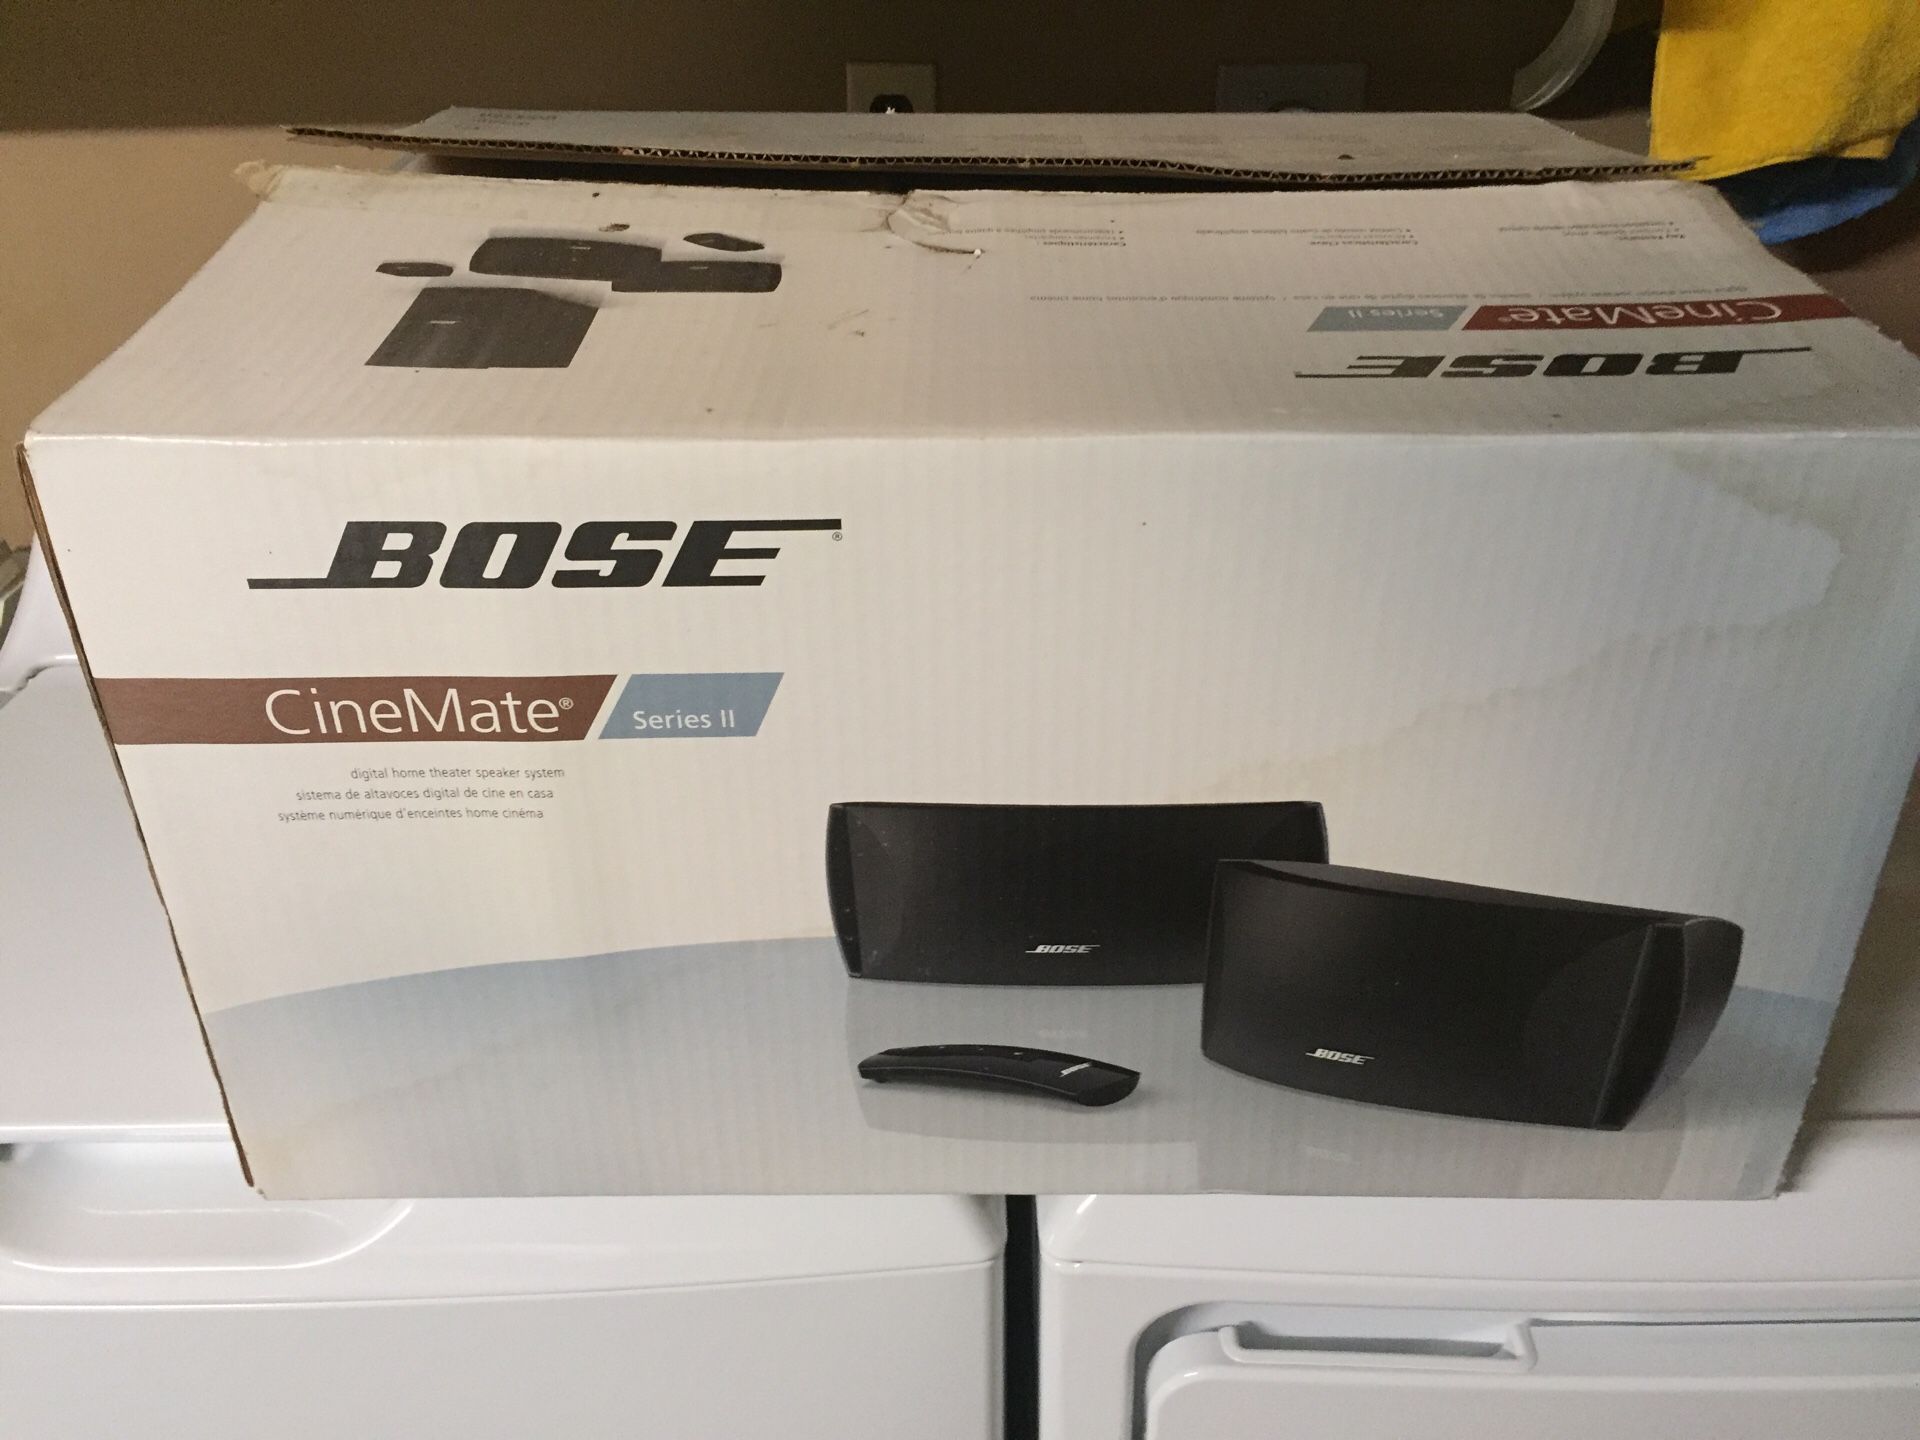 BOSE CineMate Series II Home Theater System